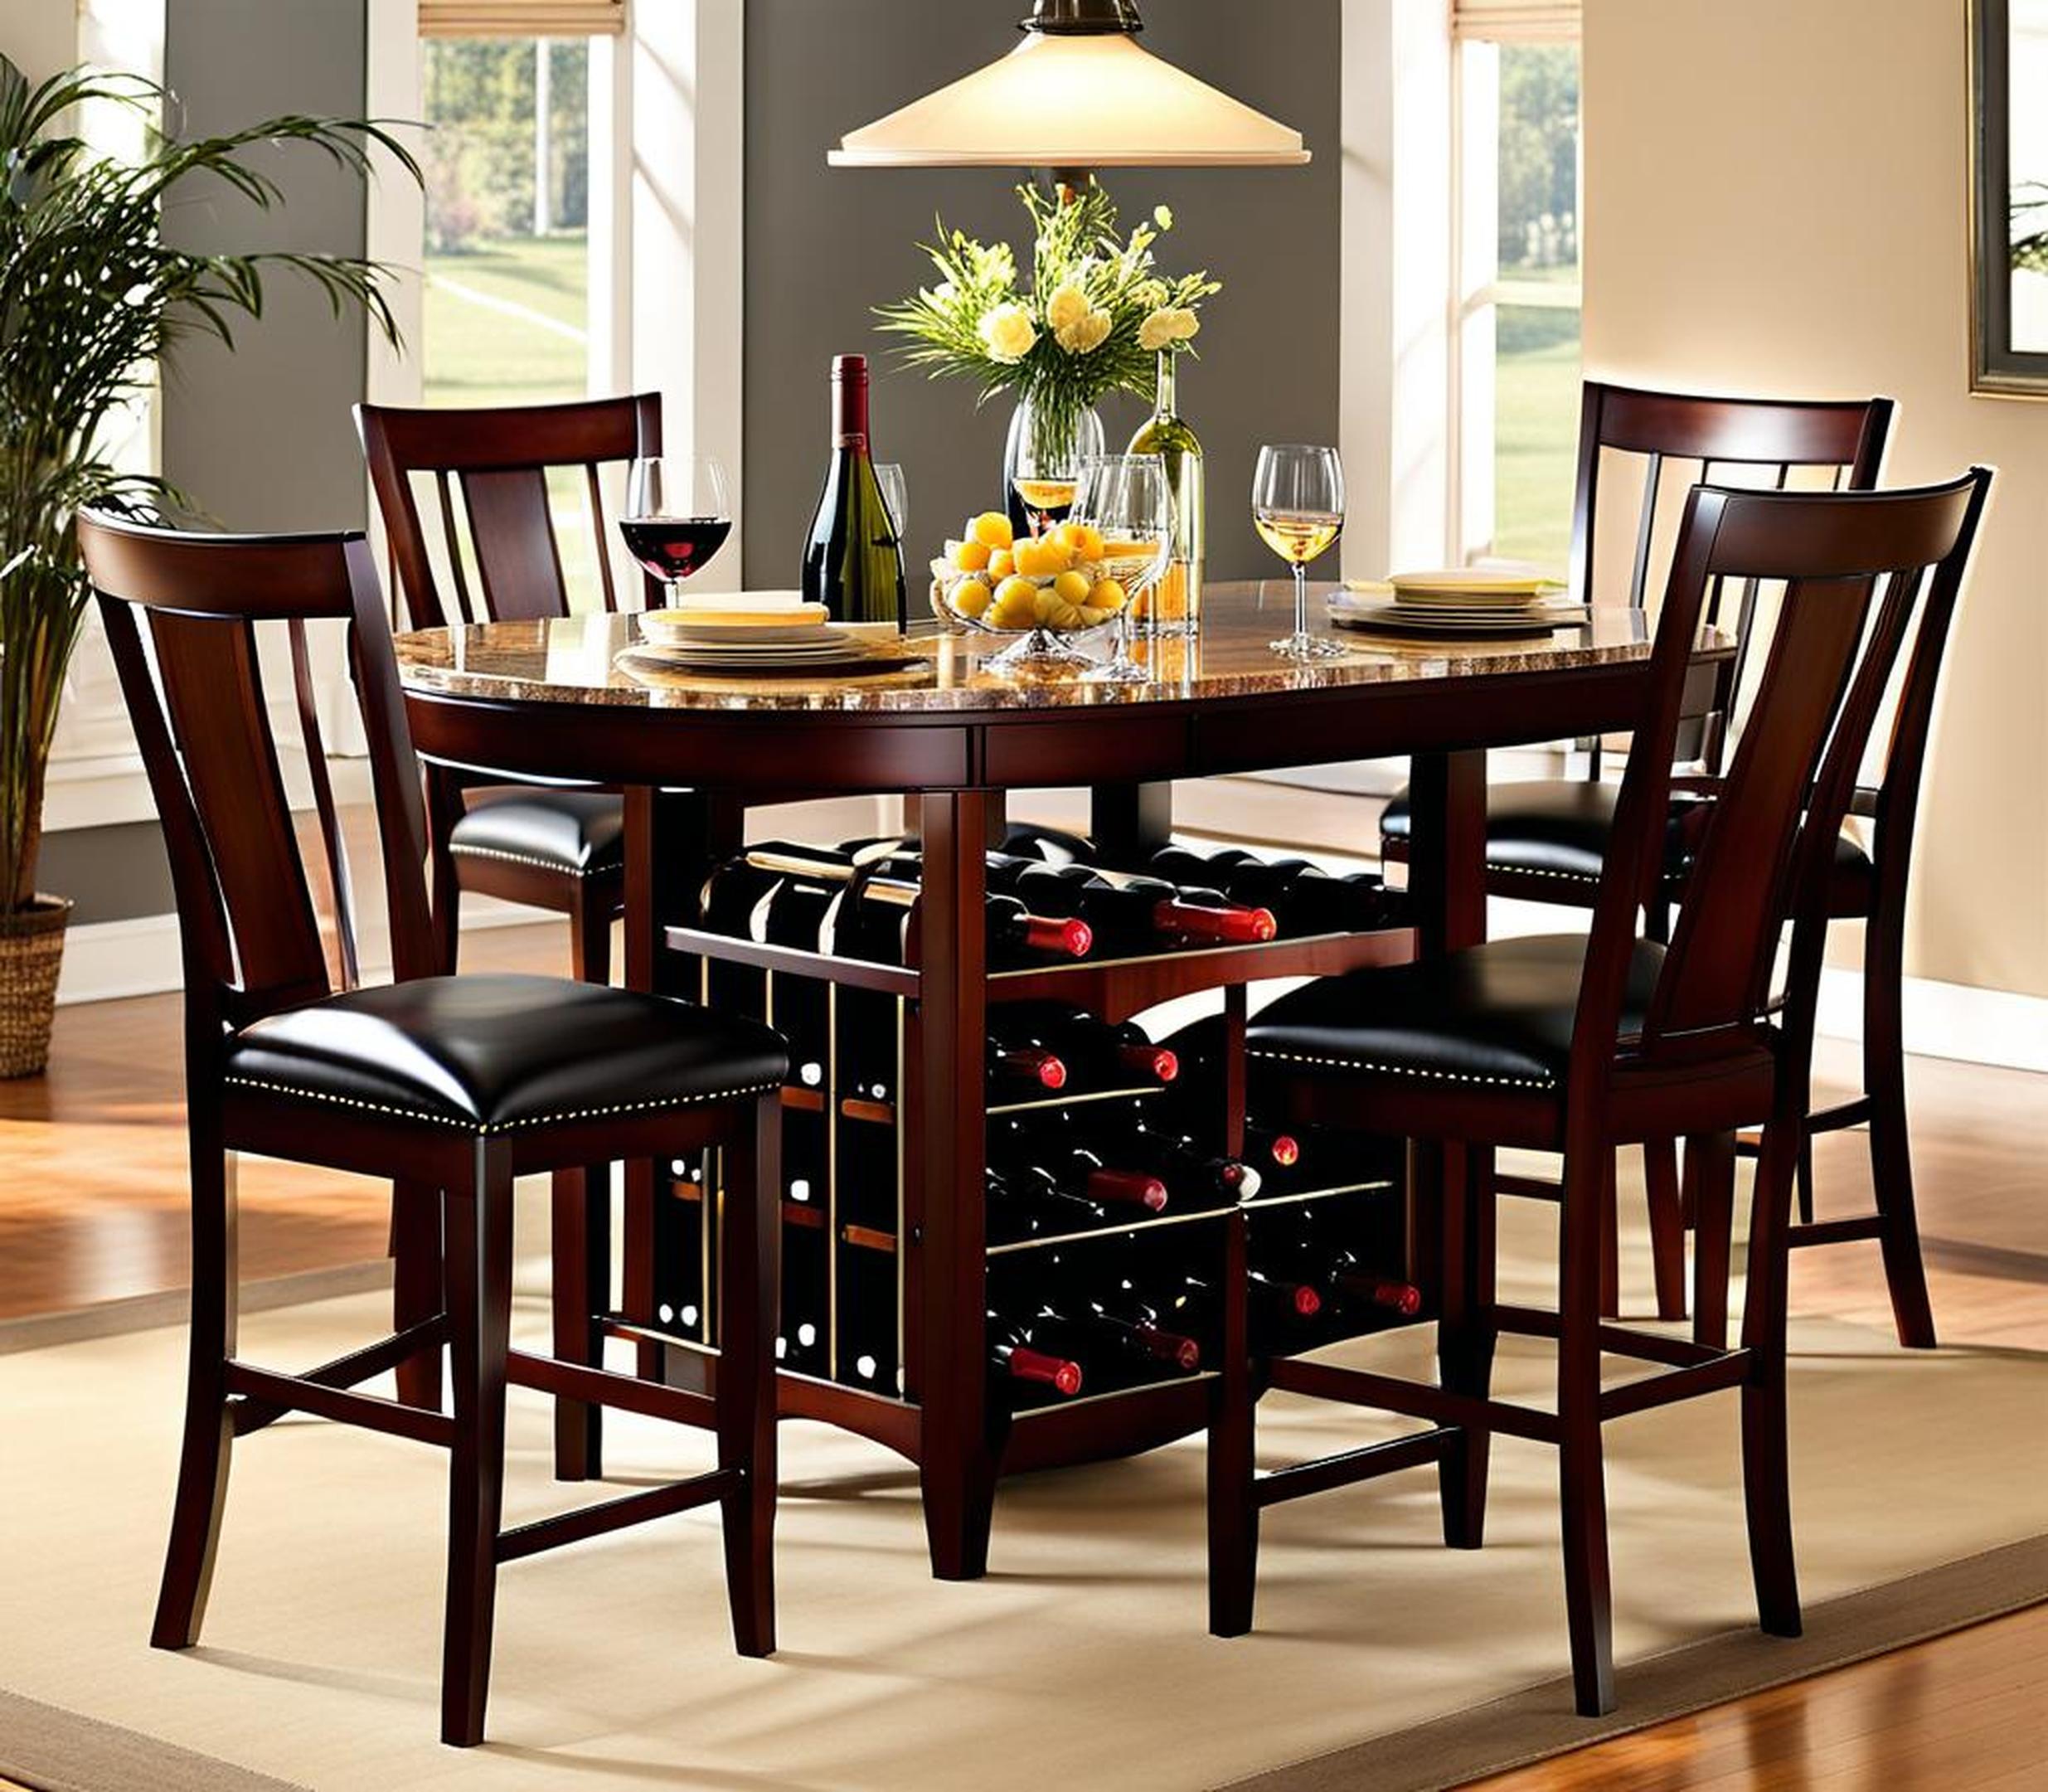 dining table with wine rack underneath